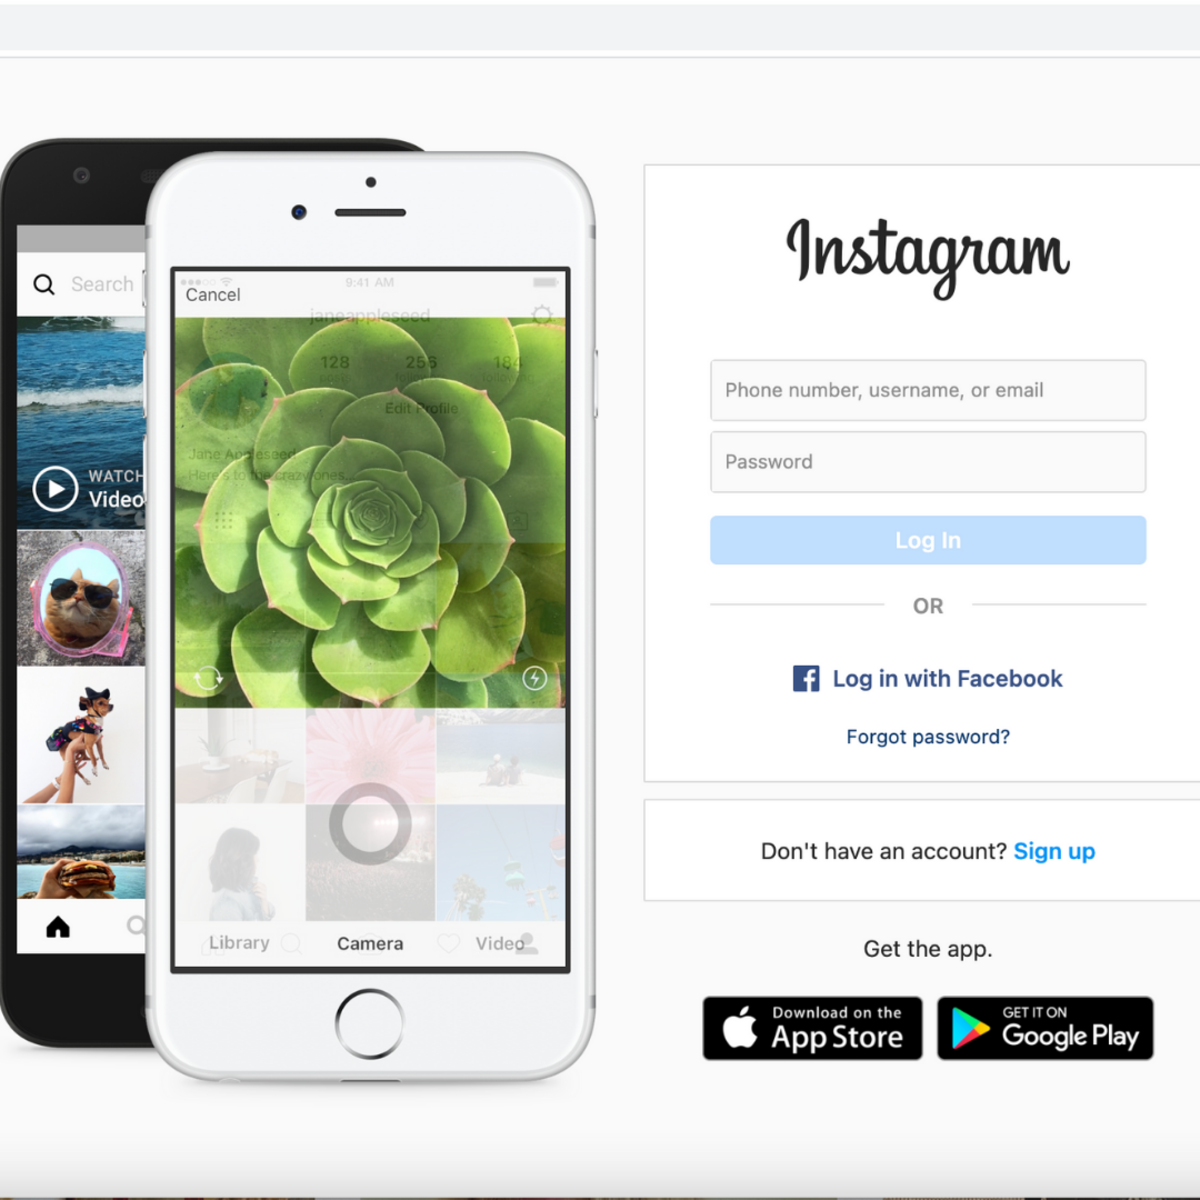 Log in to your Instagram account 